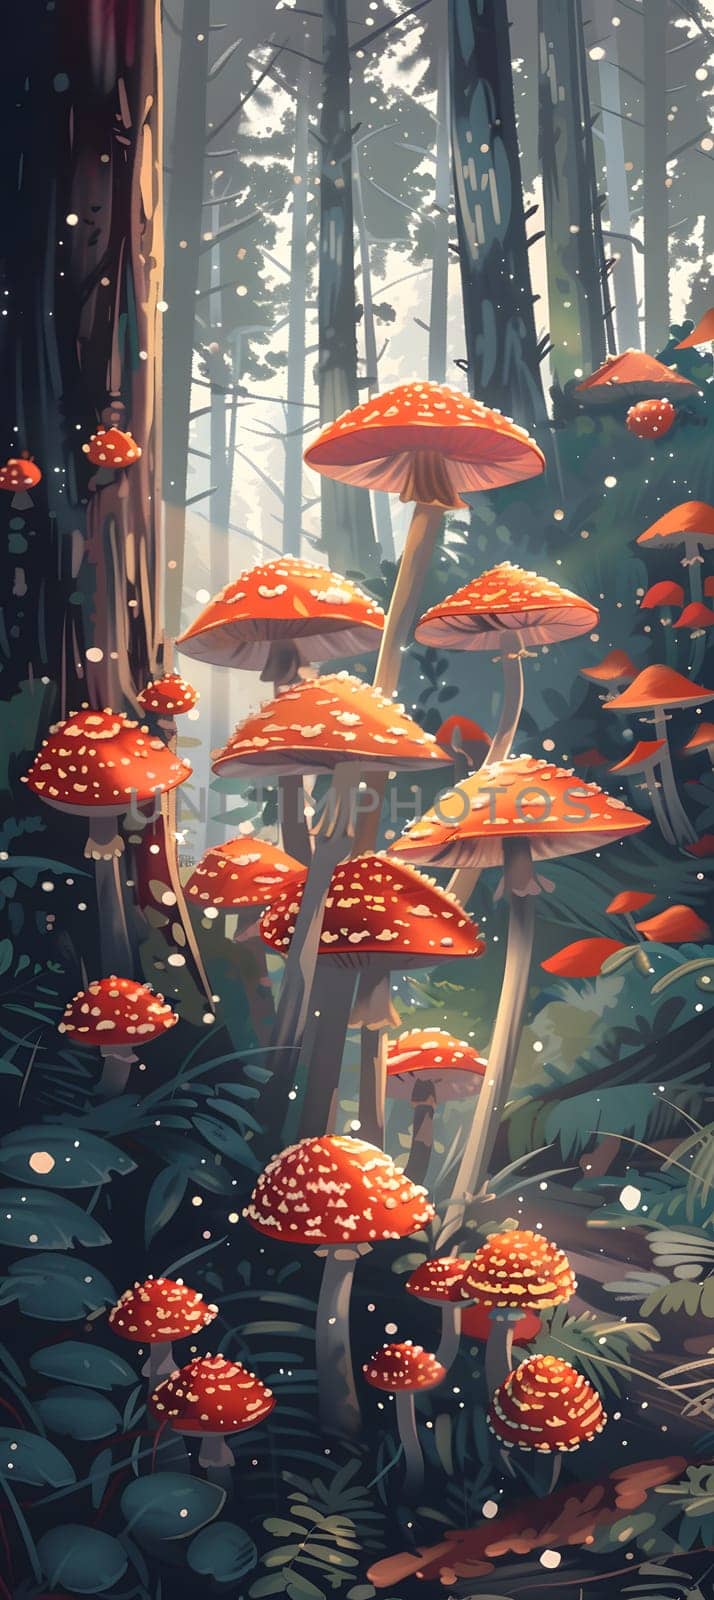 Organisms known as mushrooms grow in a forest, enhancing the natural landscape by Nadtochiy